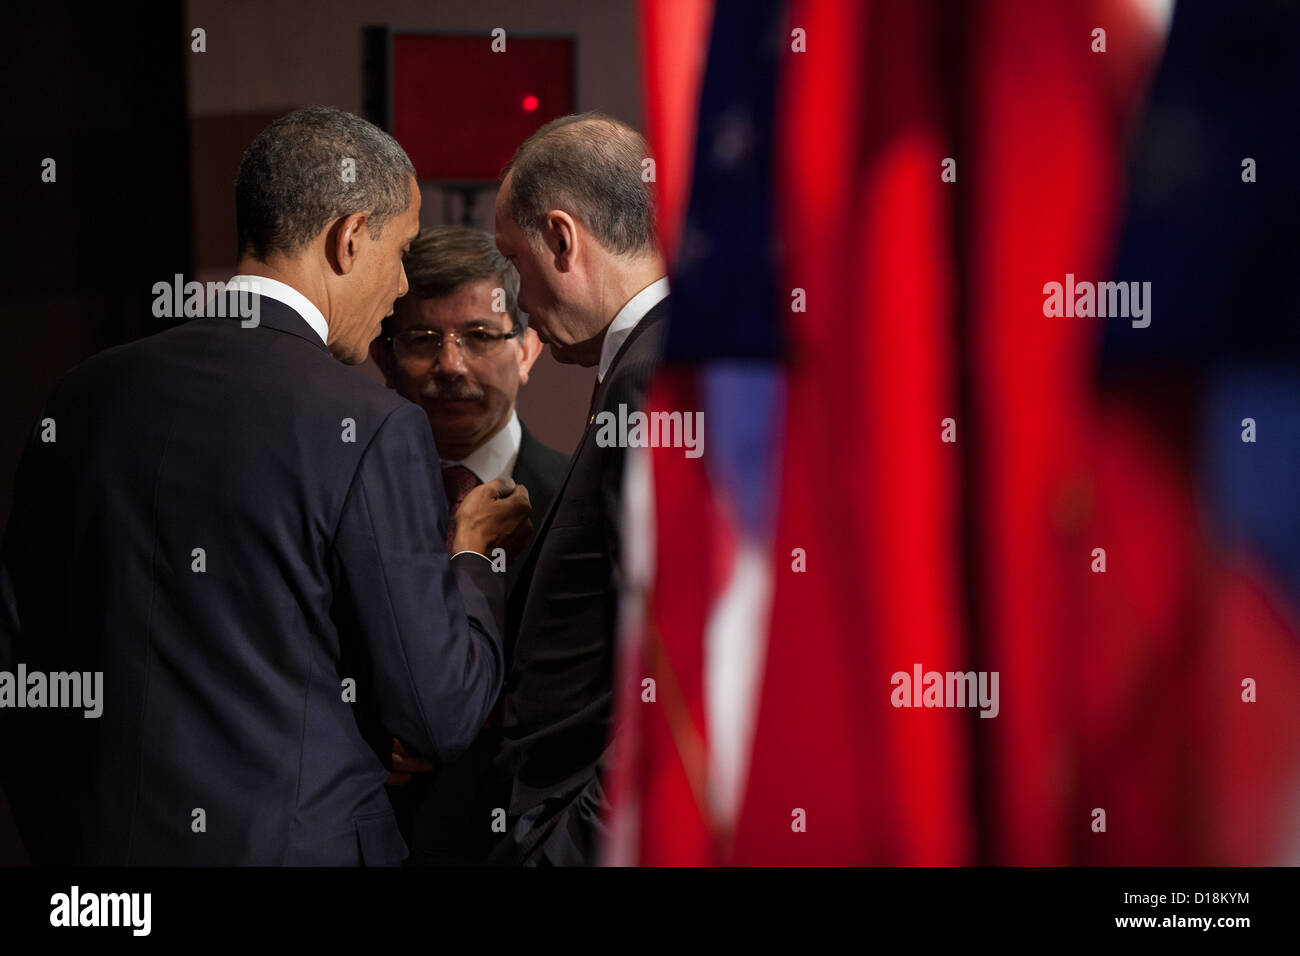 President Barack Obama talks with Prime Minister Recep Tayyip Erdog(an of Turkey, right, following their bilateral meeting at Stock Photo